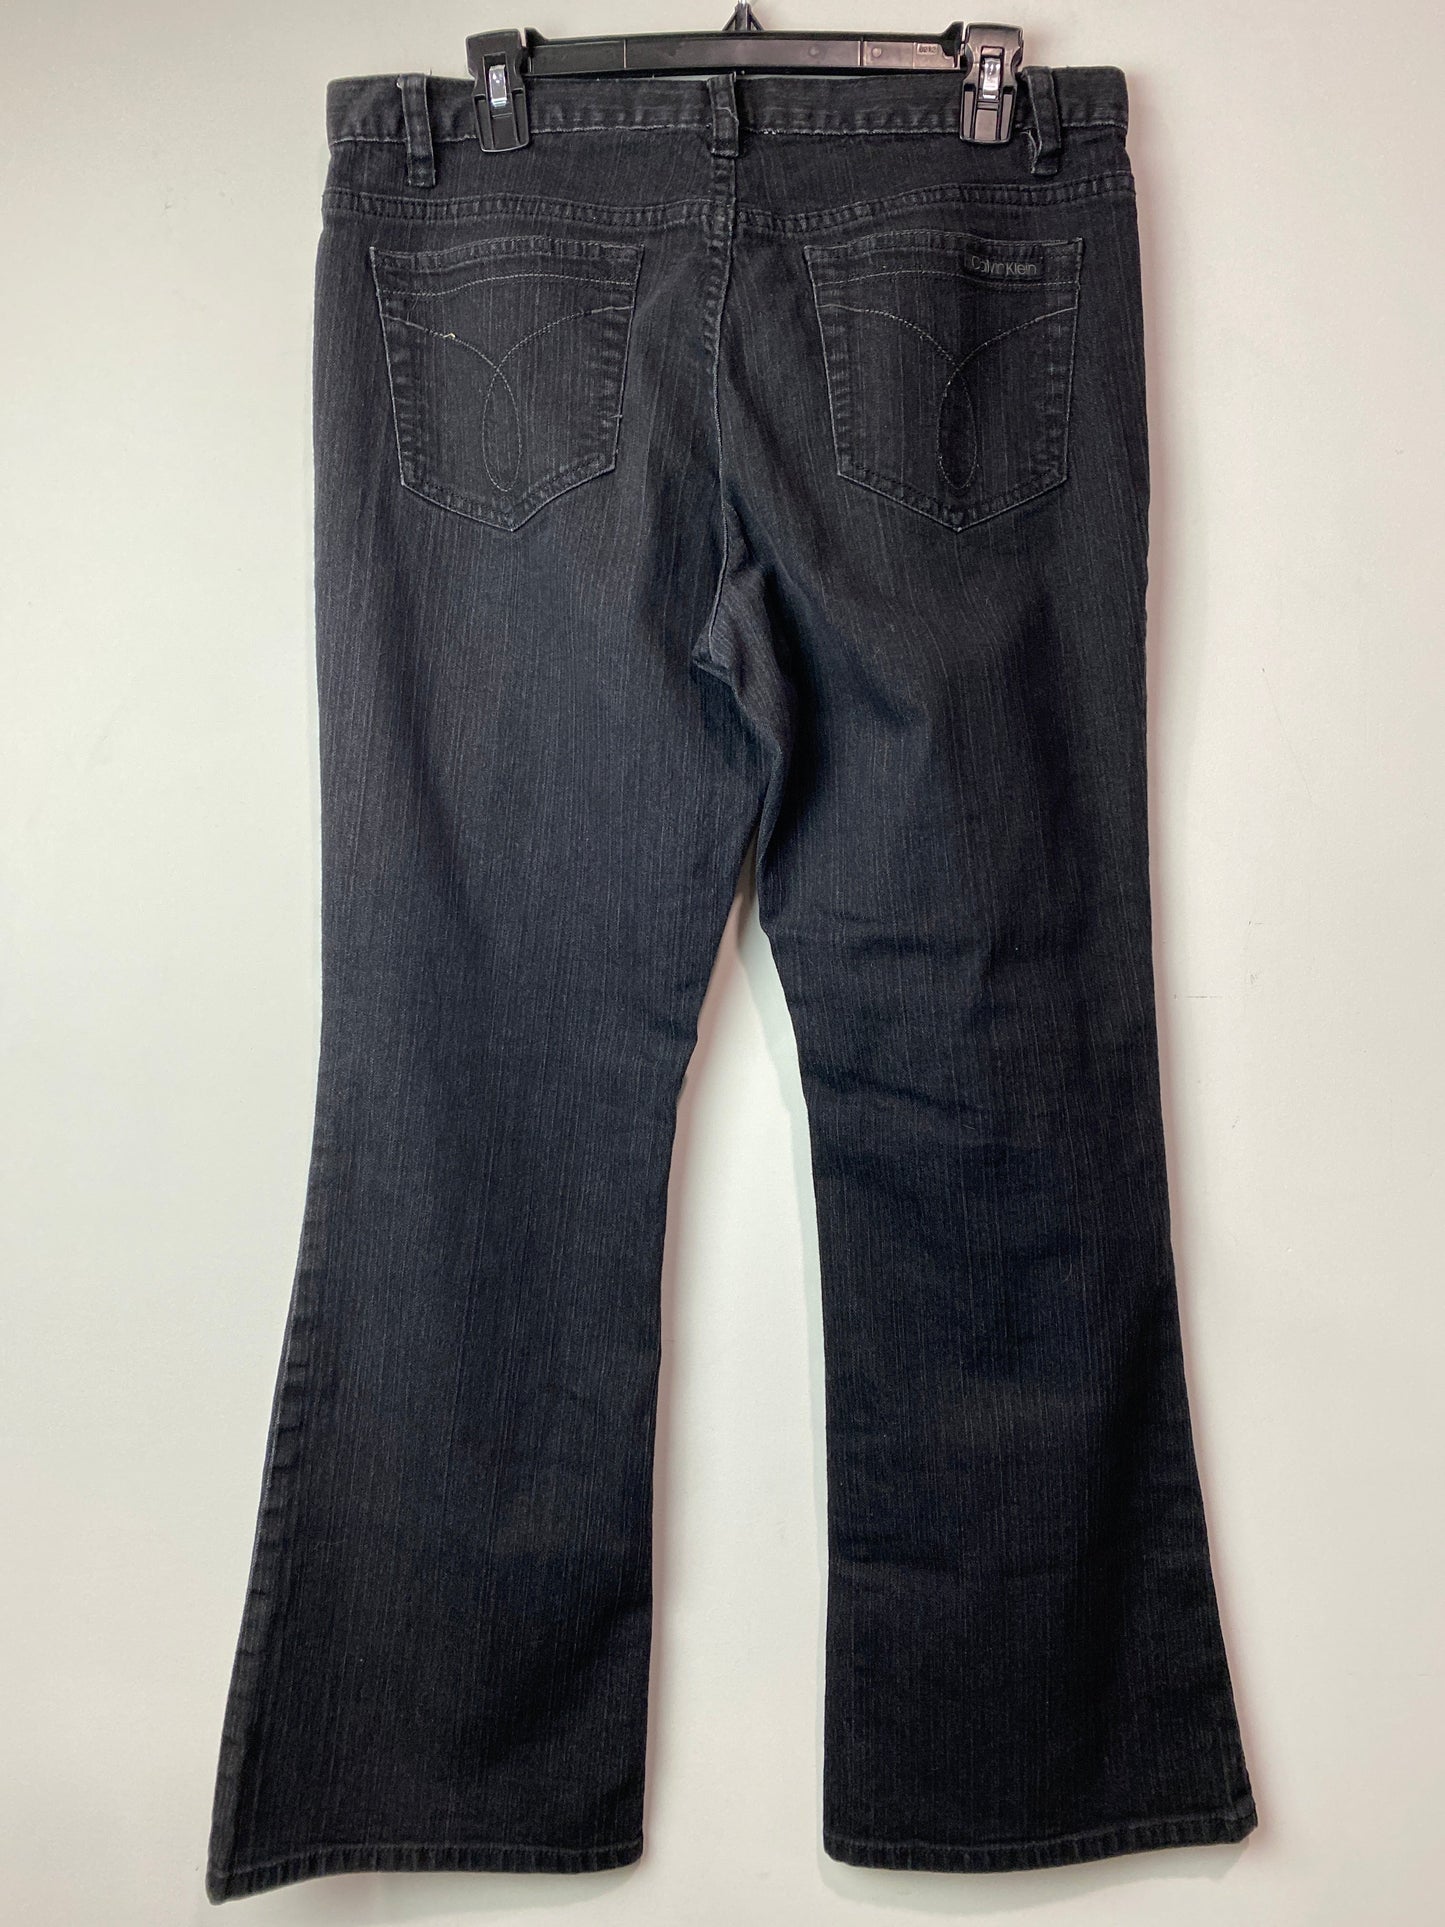 Jeans Flared By Calvin Klein  Size: 12